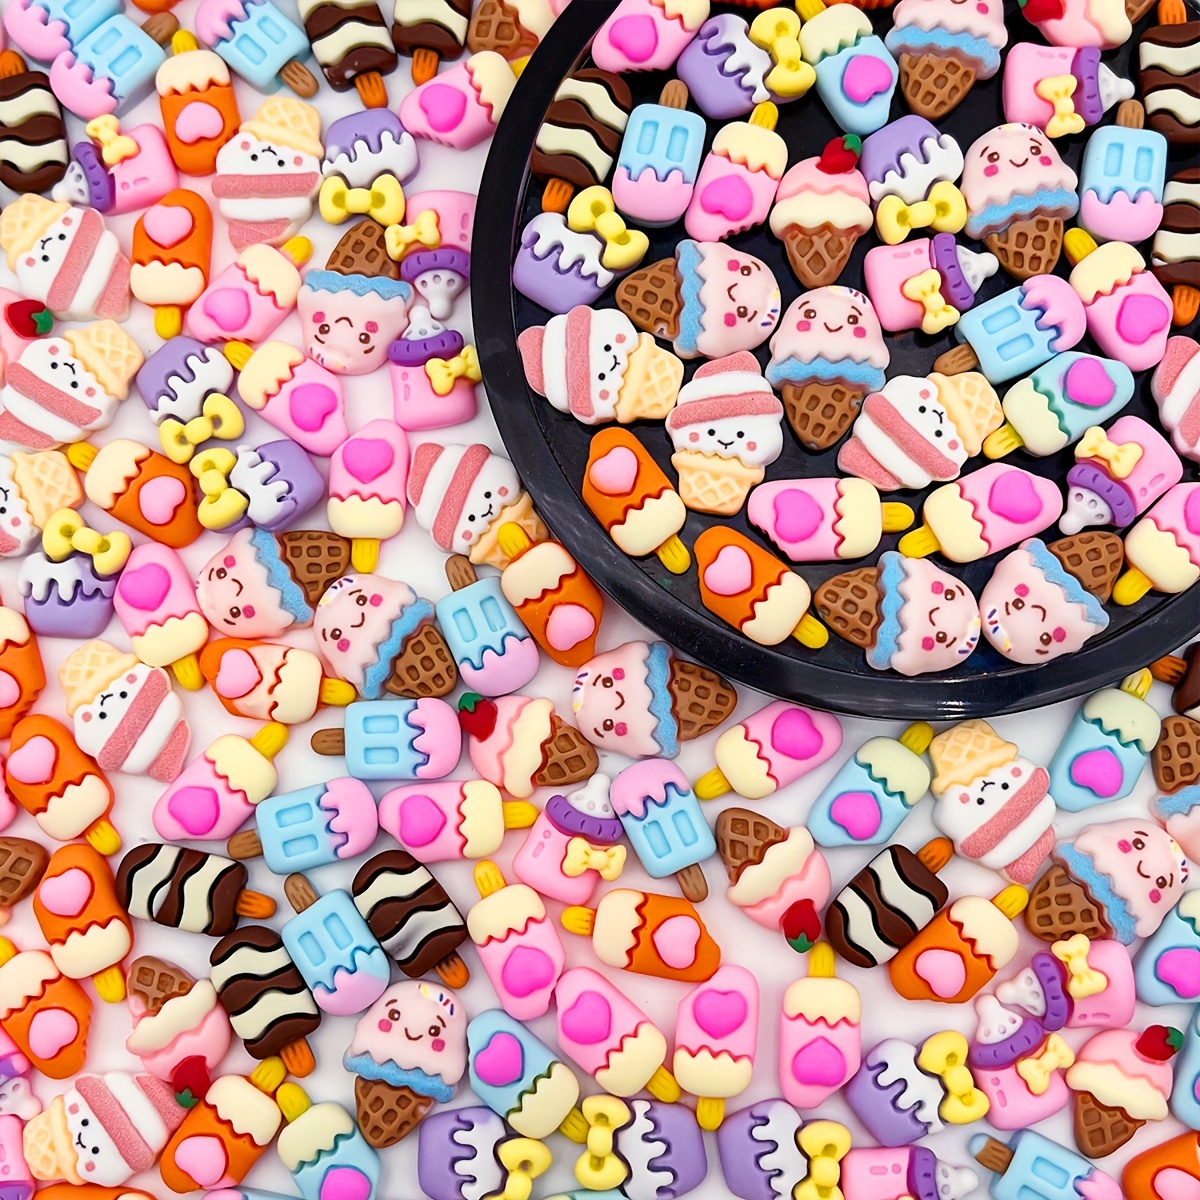 50 Pcs Mix Soft Candy Resin Charms Flatback Fake Candy Buttons  Embellishments Making Supplies for Cell Phone Case Scrapbooking Hair Clip